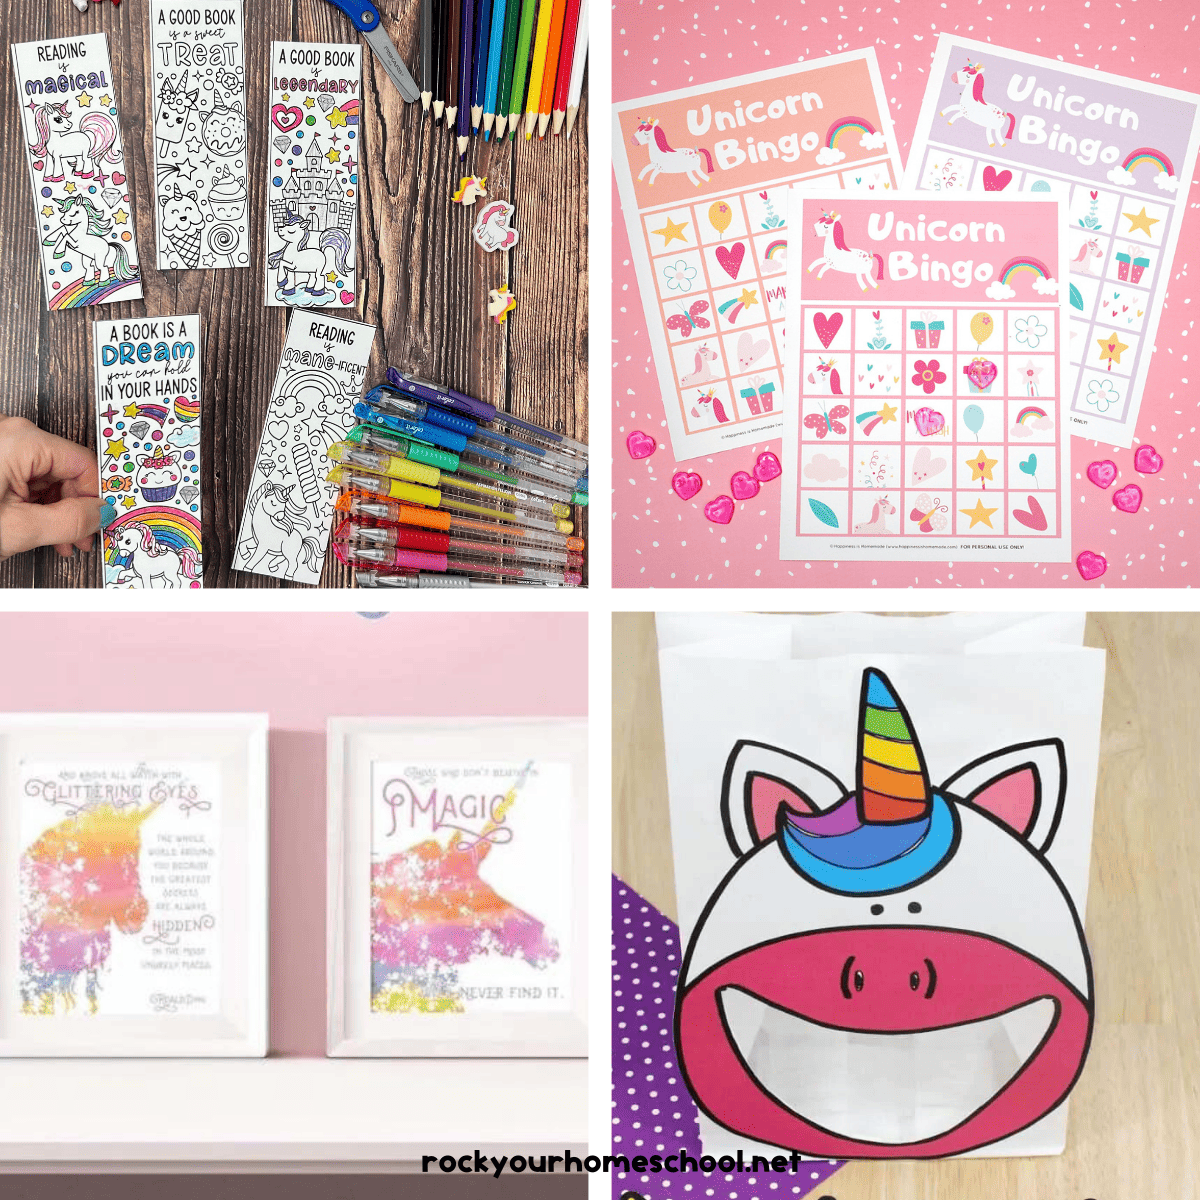 Four examples of free unicorn printables for kids with coloring bookmarks, bingo game, wall art, and letter sorting activity.